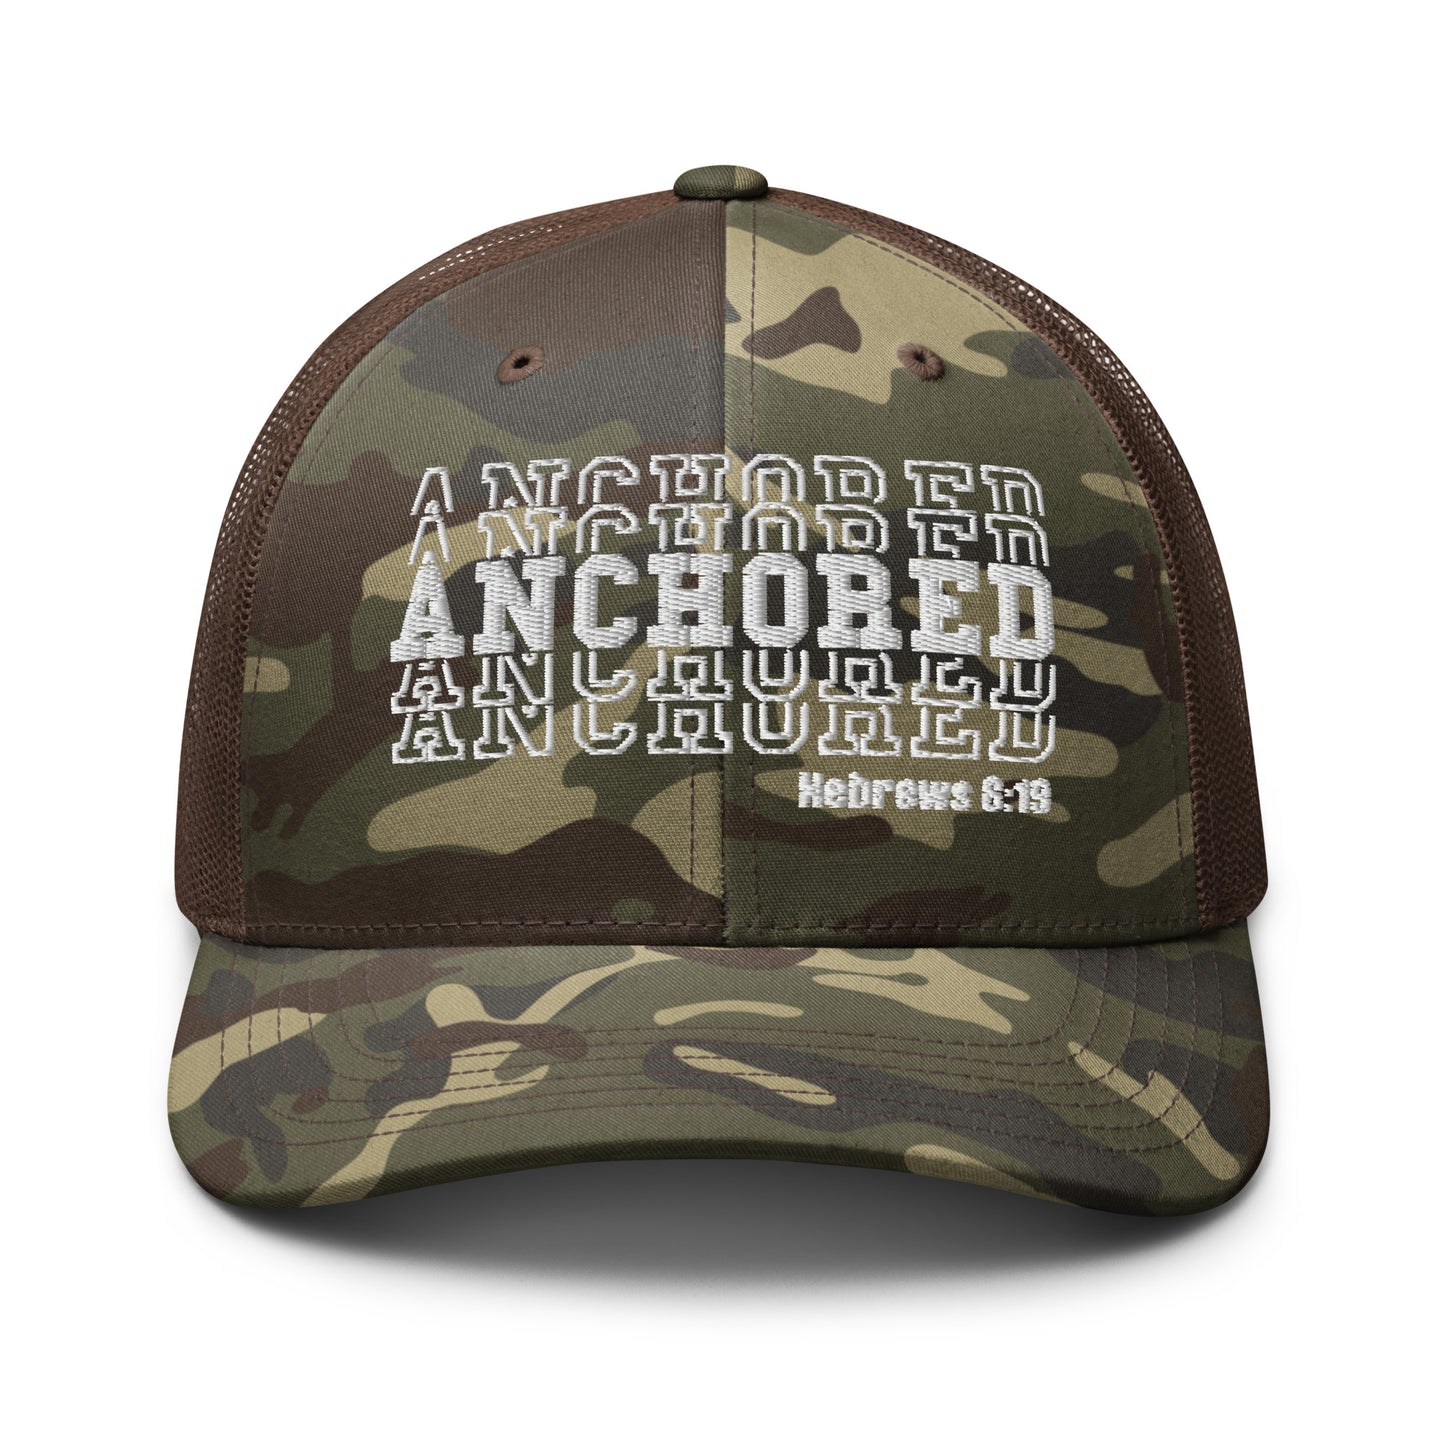 "Anchored" Camouflage Trucker Hat